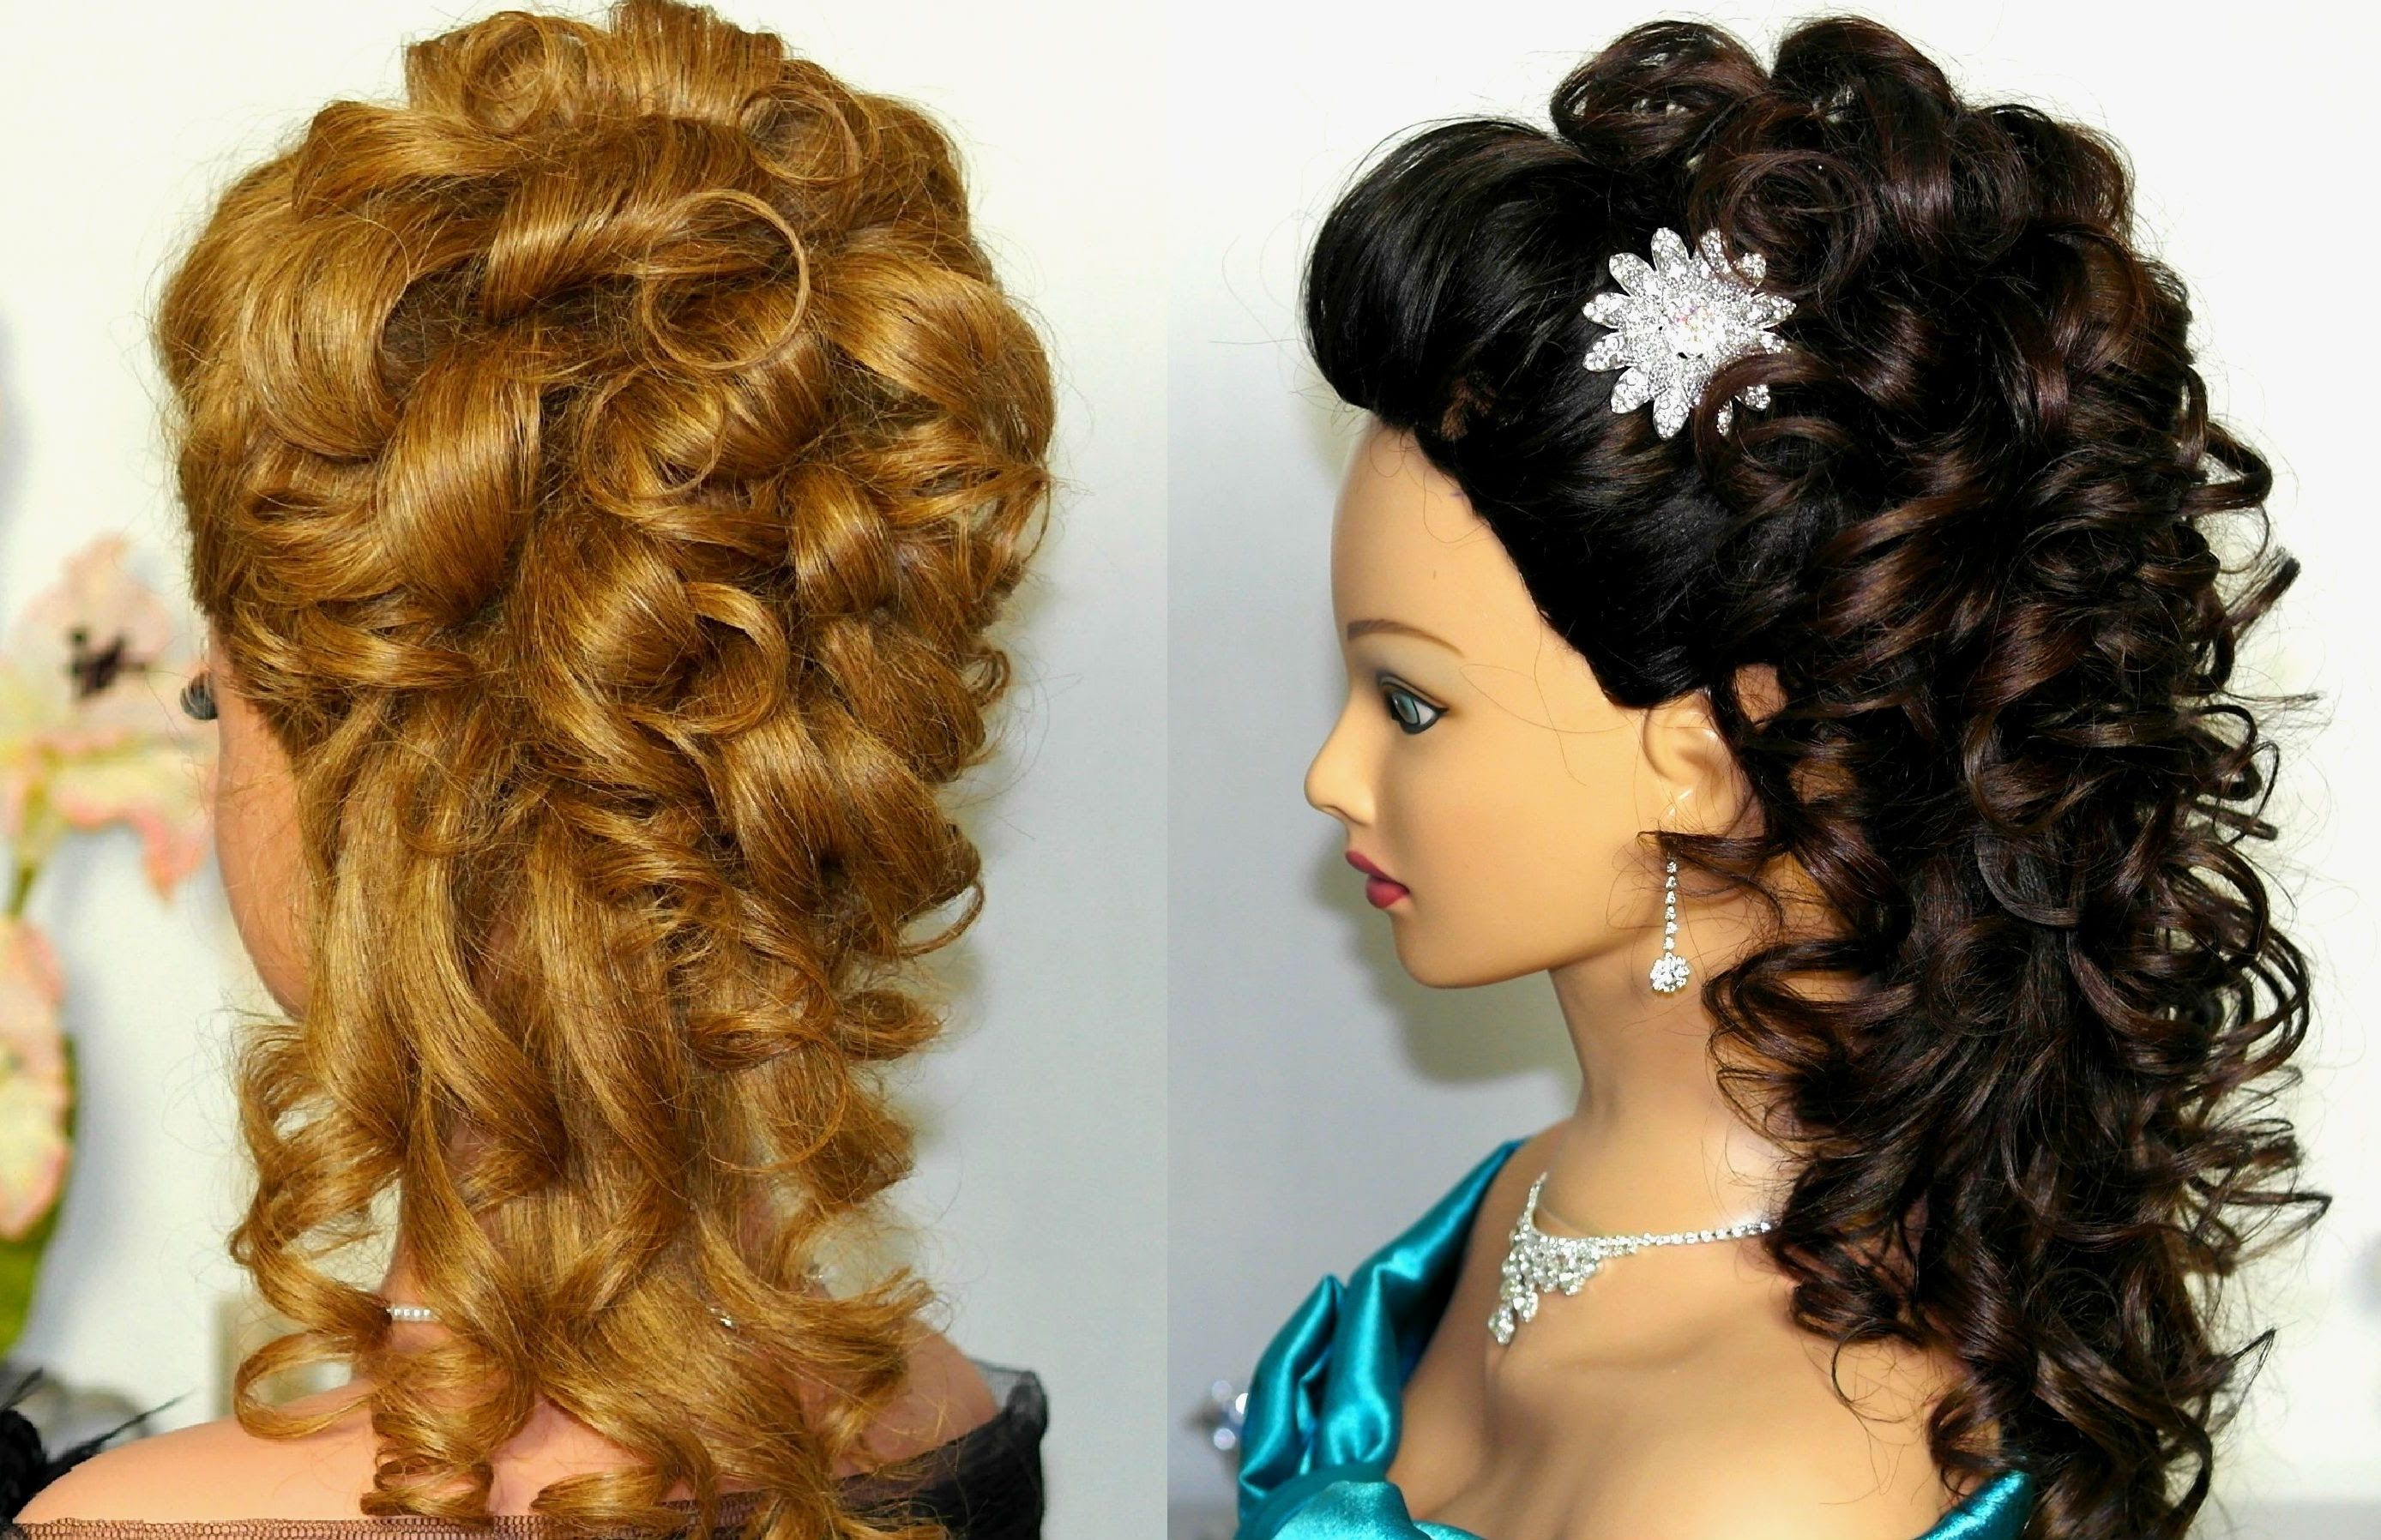 Fashionable Wedding Updos For Long Curly Hair Inside Bridal, Prom Hairstyle For Long Hair. Curly Hairstyle (View 5 of 15)